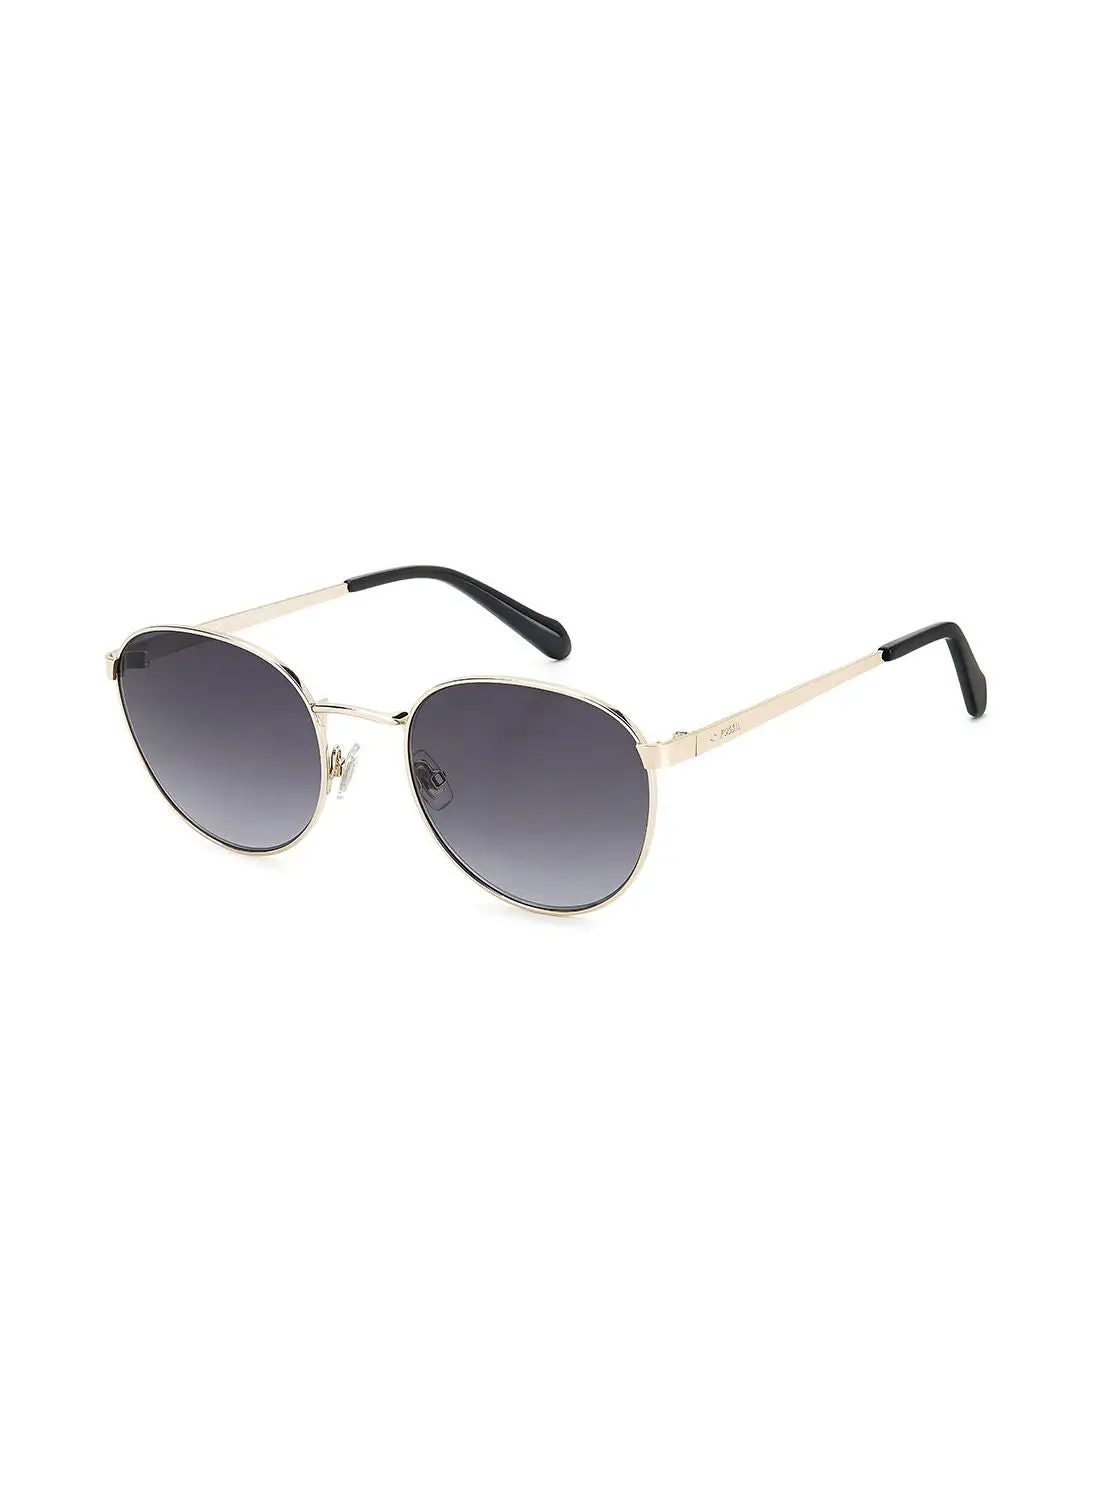 FOSSIL Women's UV Protection Round Sunglasses - Fos 2129/G/S Lgh Gold 52 - Lens Size: 52 Mm